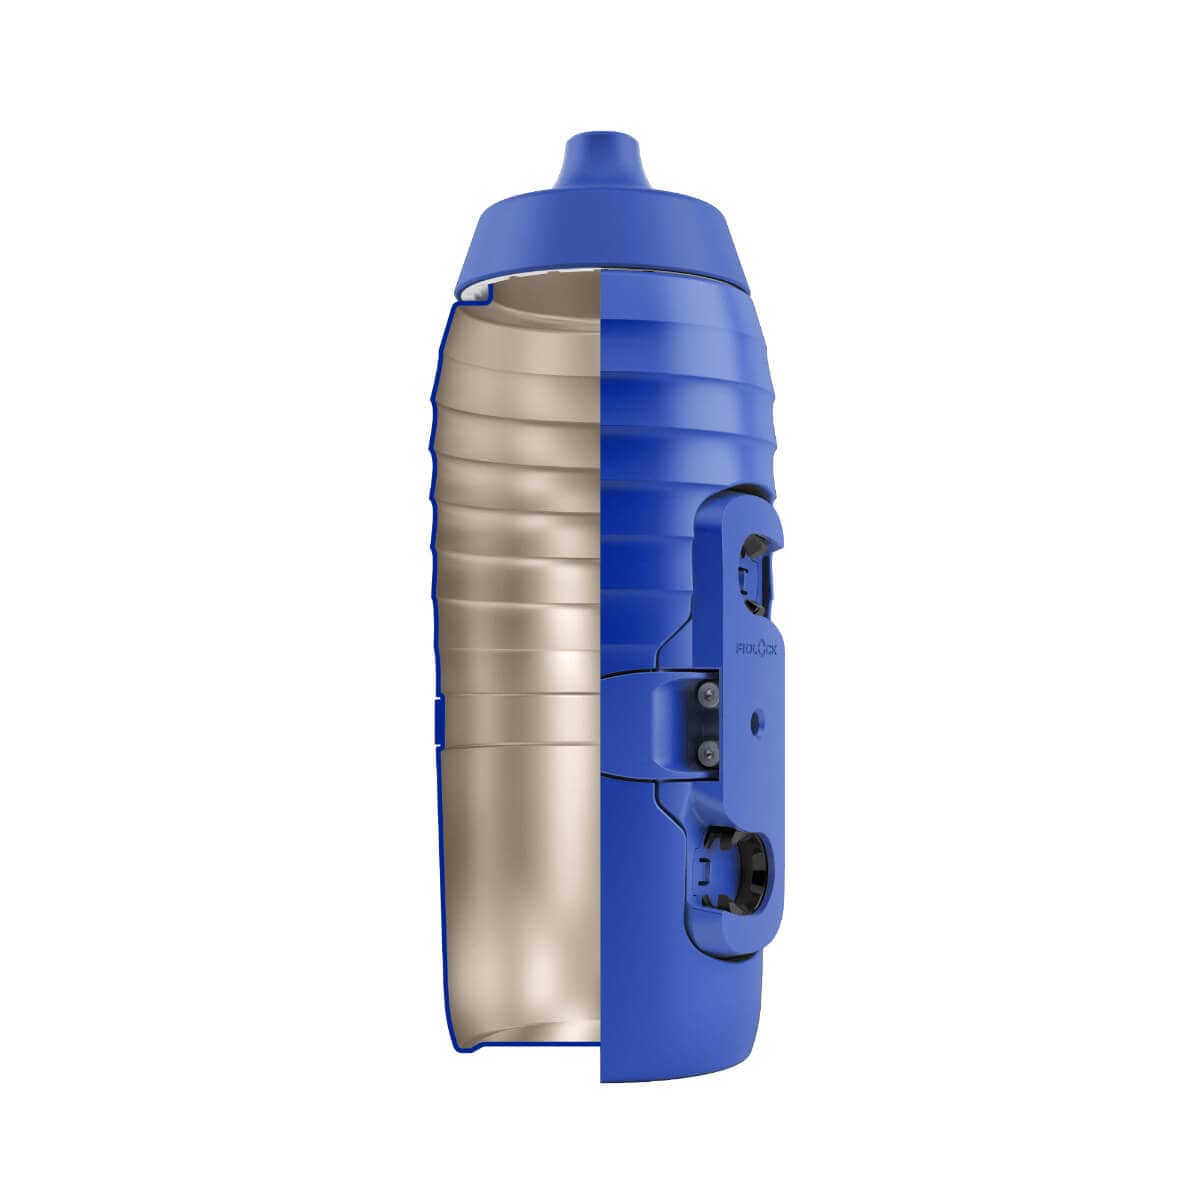 Cut of blue bicycle bottle TWIST x KEEGO 0.6L upright with visible titanium interior